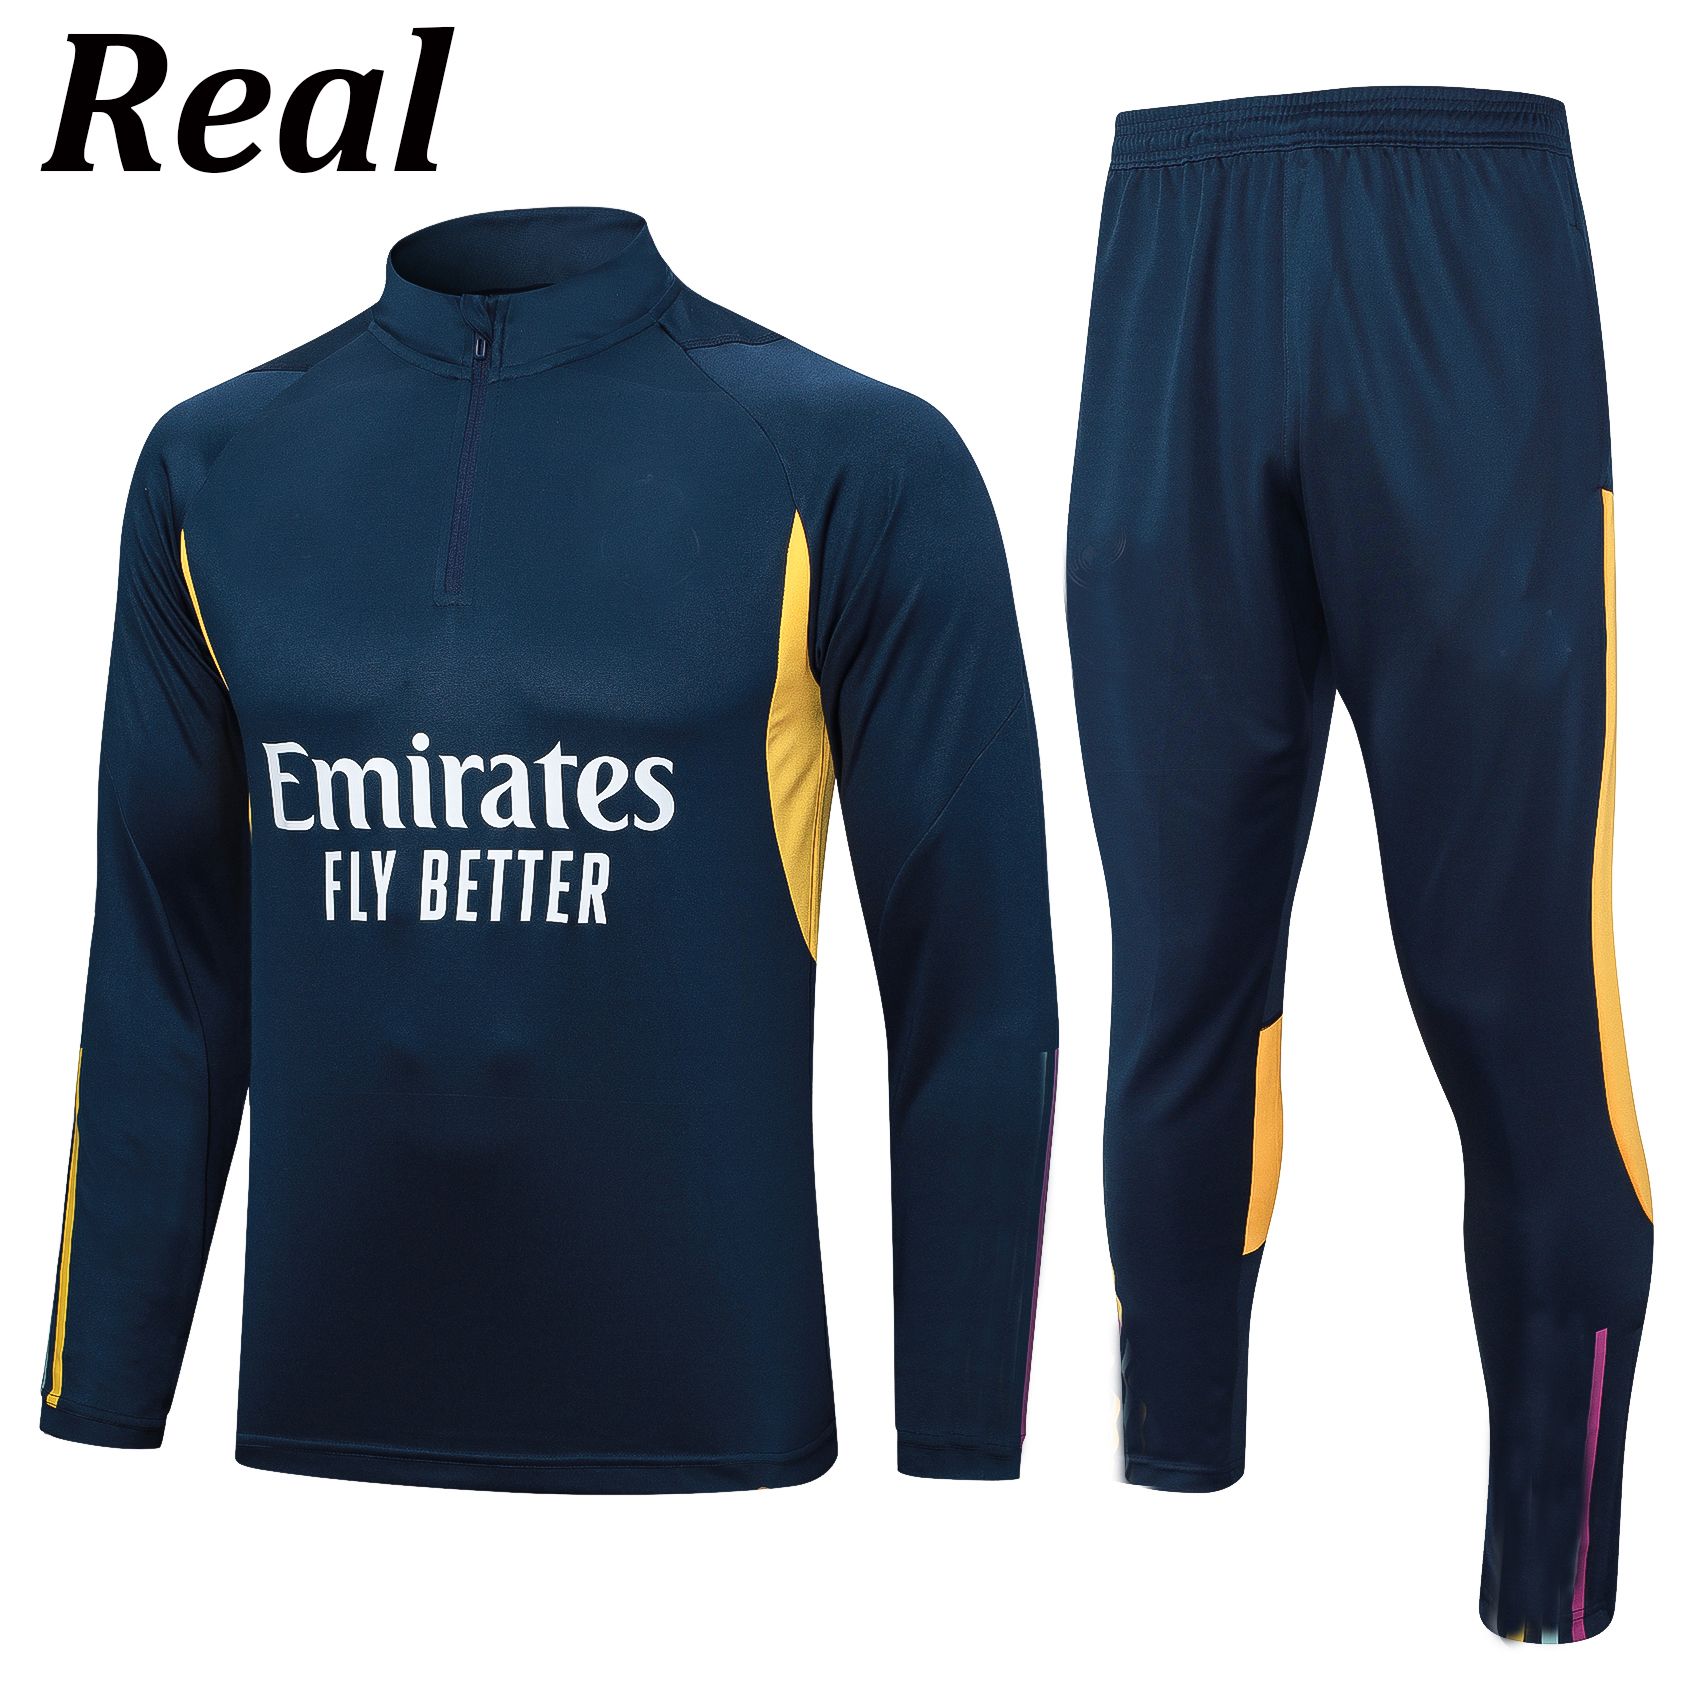 Real-Tracksuit-4